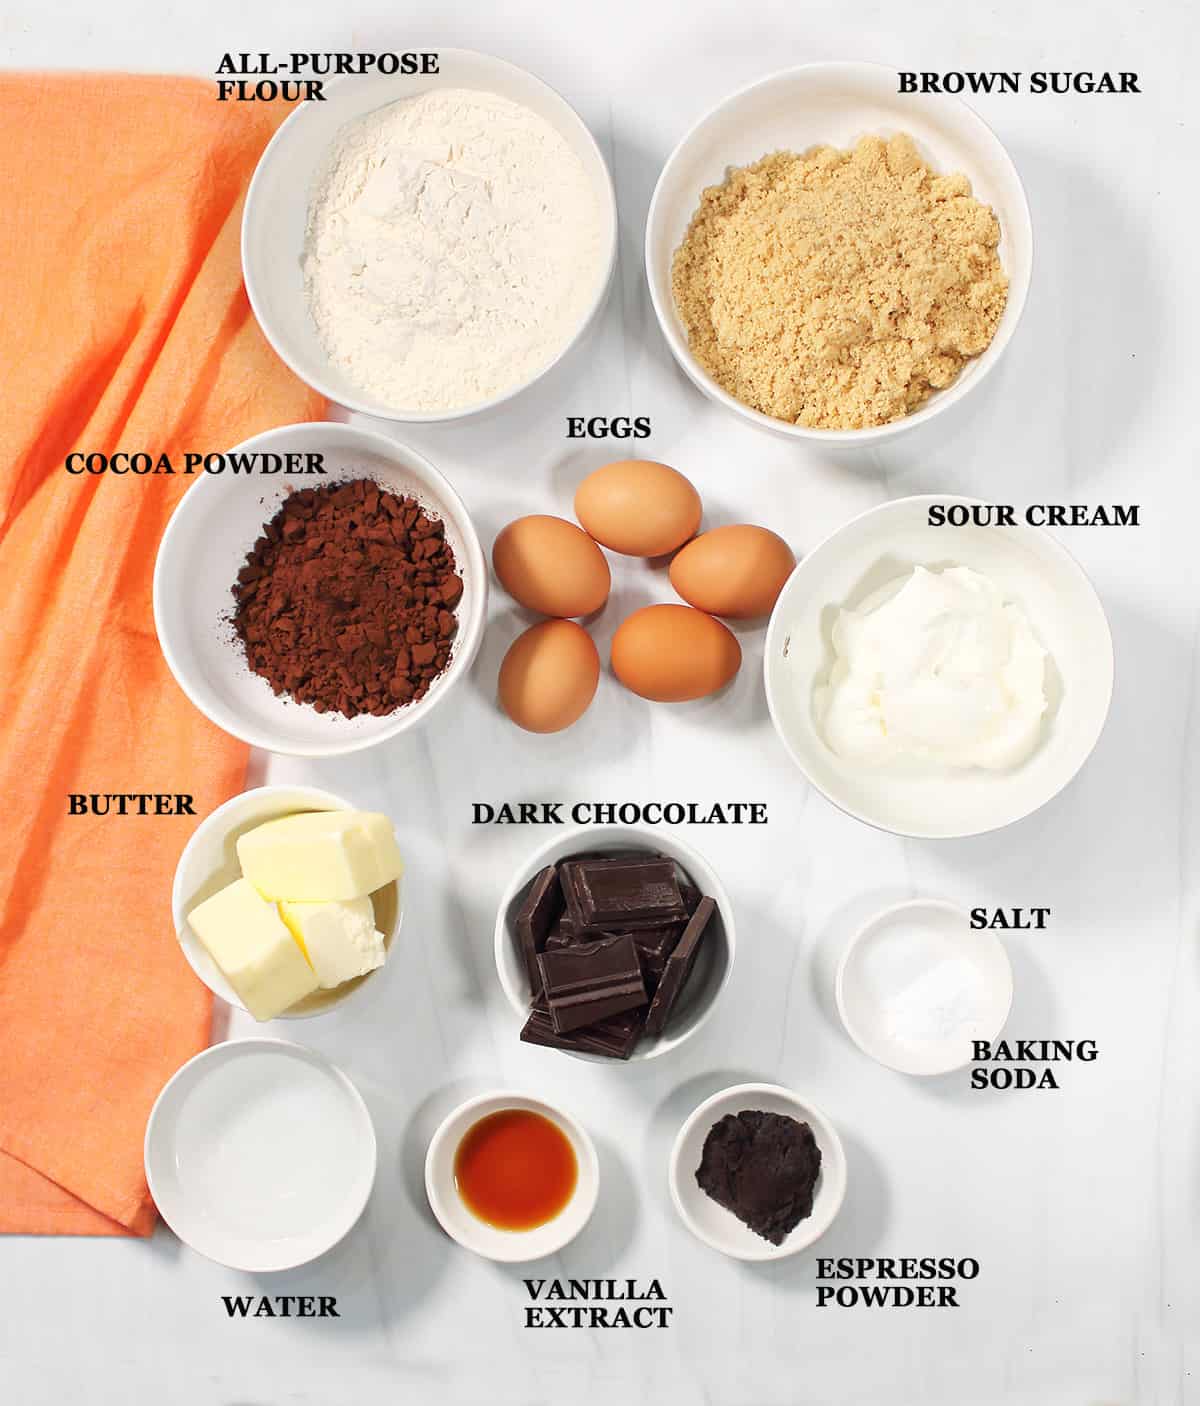 Ingredients for Chocolate Bundt Cake.